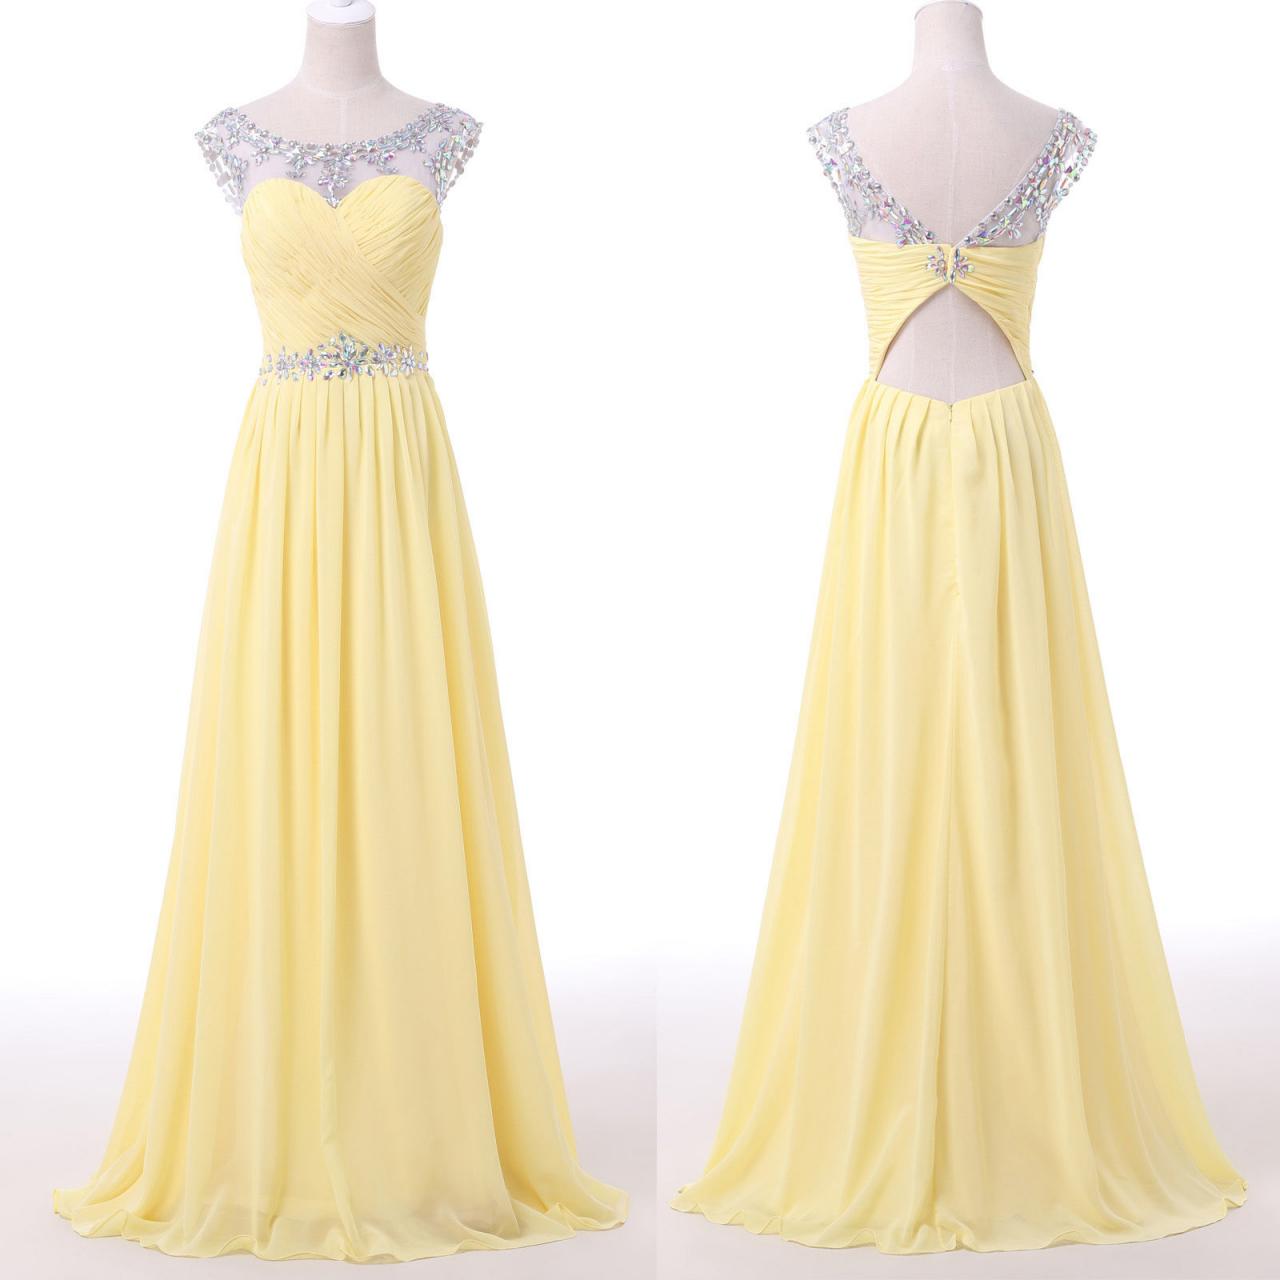 Long Chiffon Prom Dresses,elegant Pretty Prom Gowns,party Gowns,charming Modest Evening Gowns,bridesmaid Dresses